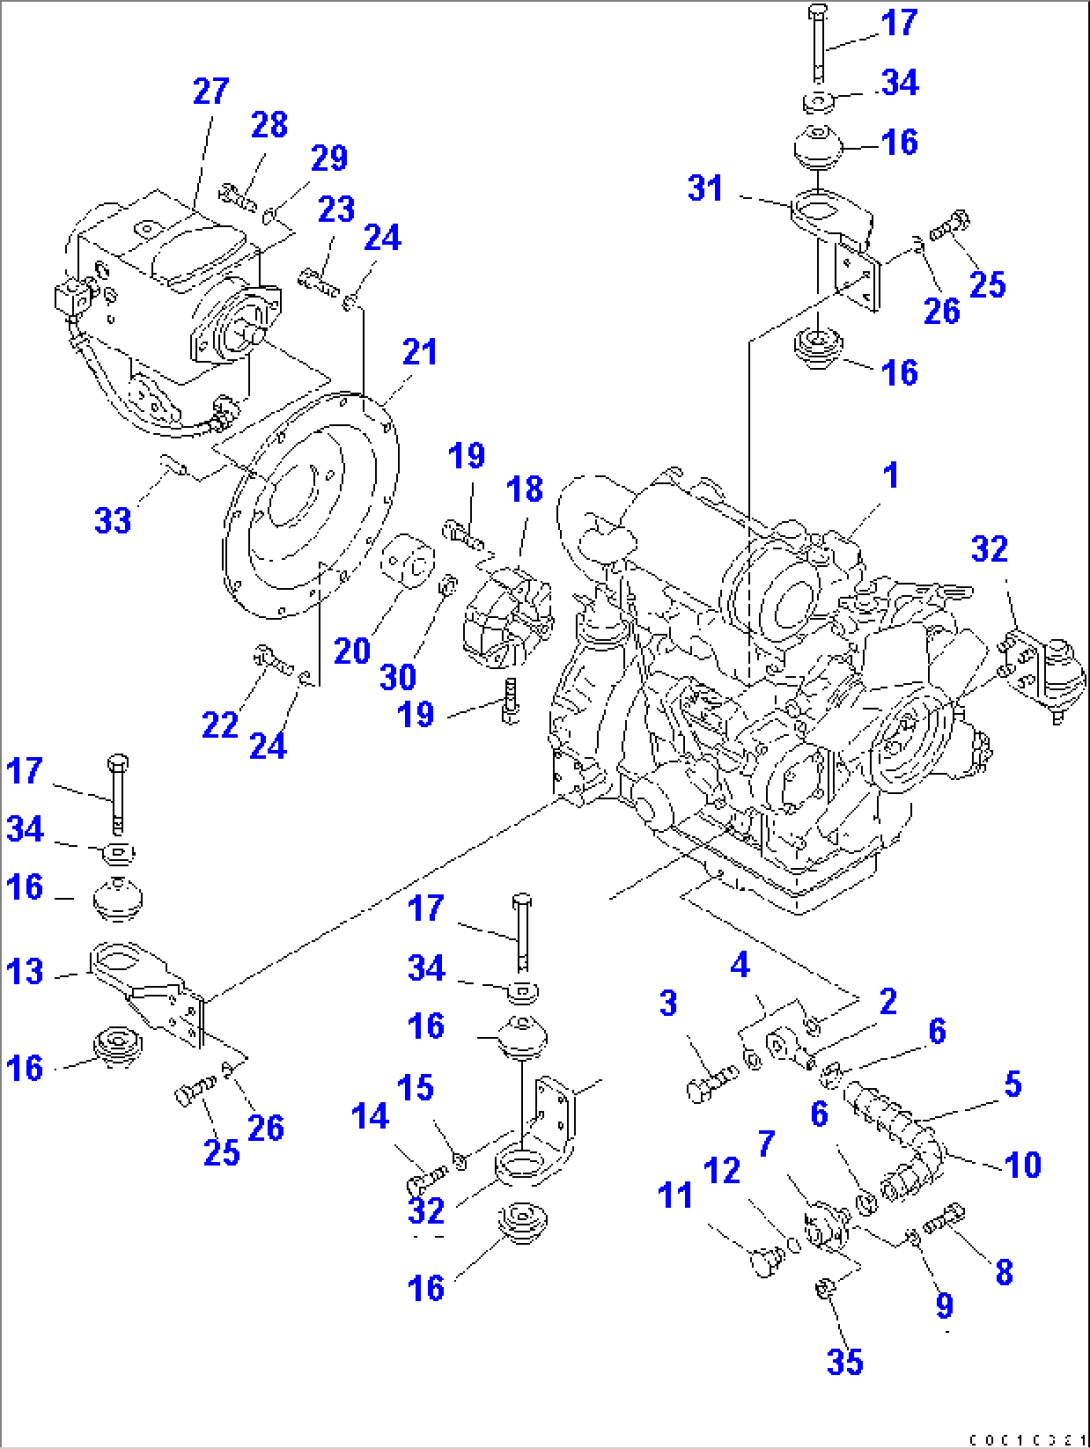 ENGINE MOUNTING PARTS AND HST PUMP(#2201-)